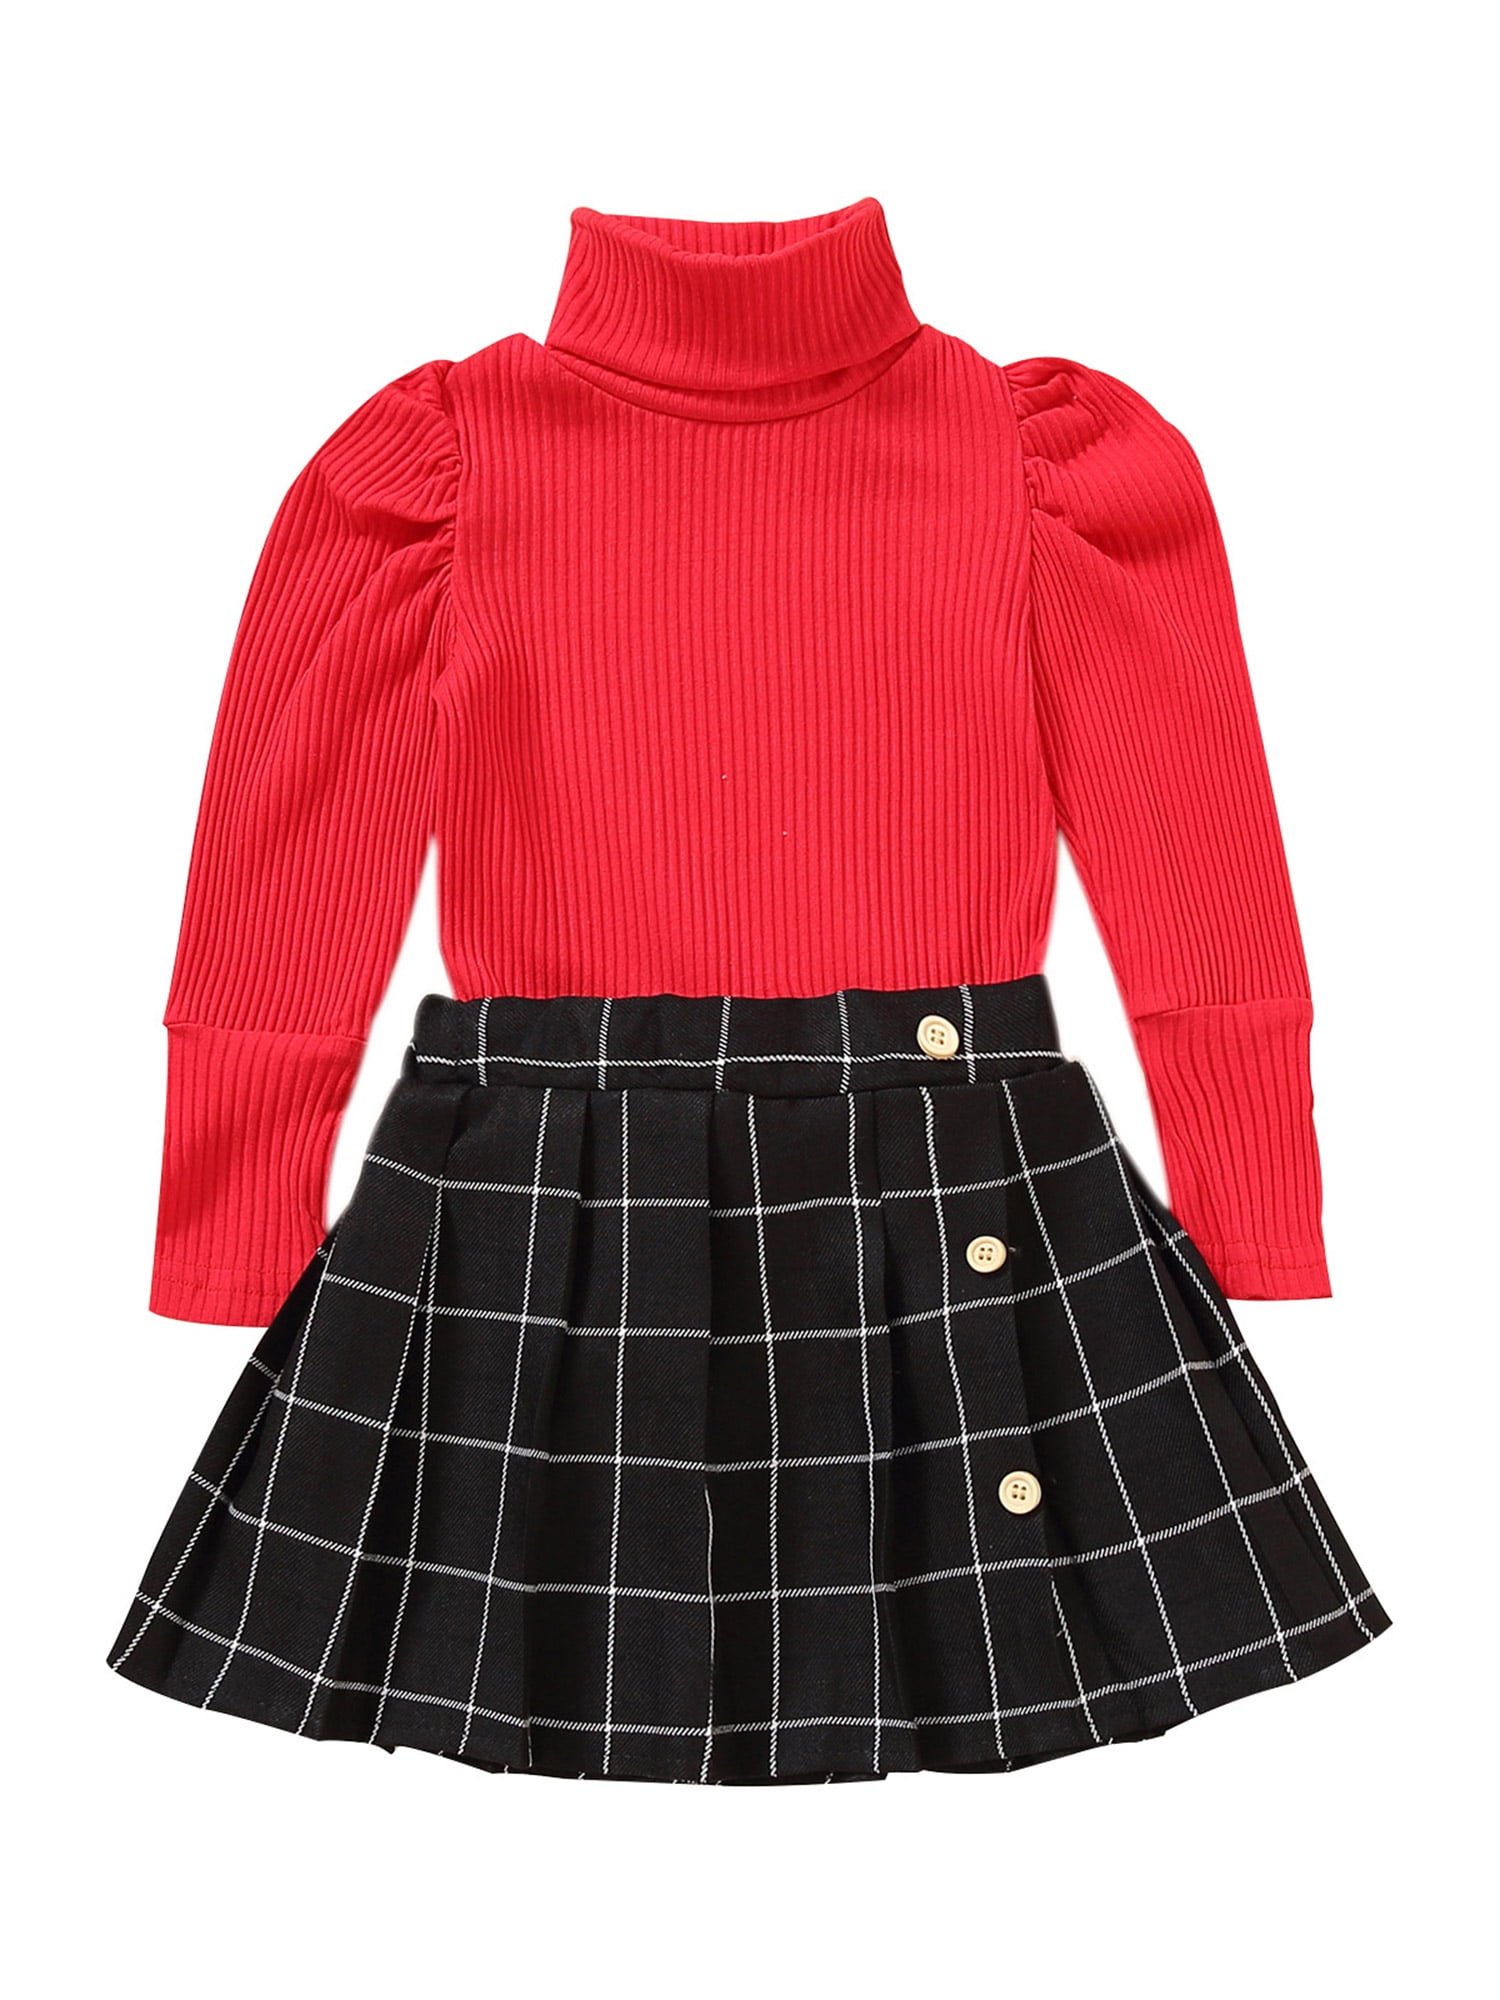 Gwiyeopda Toddler Girls Outfits Turtleneck Long Sleeve Knitted Tops + Preppy  Style Plaid Mini Pleated Skirt Cute Set 